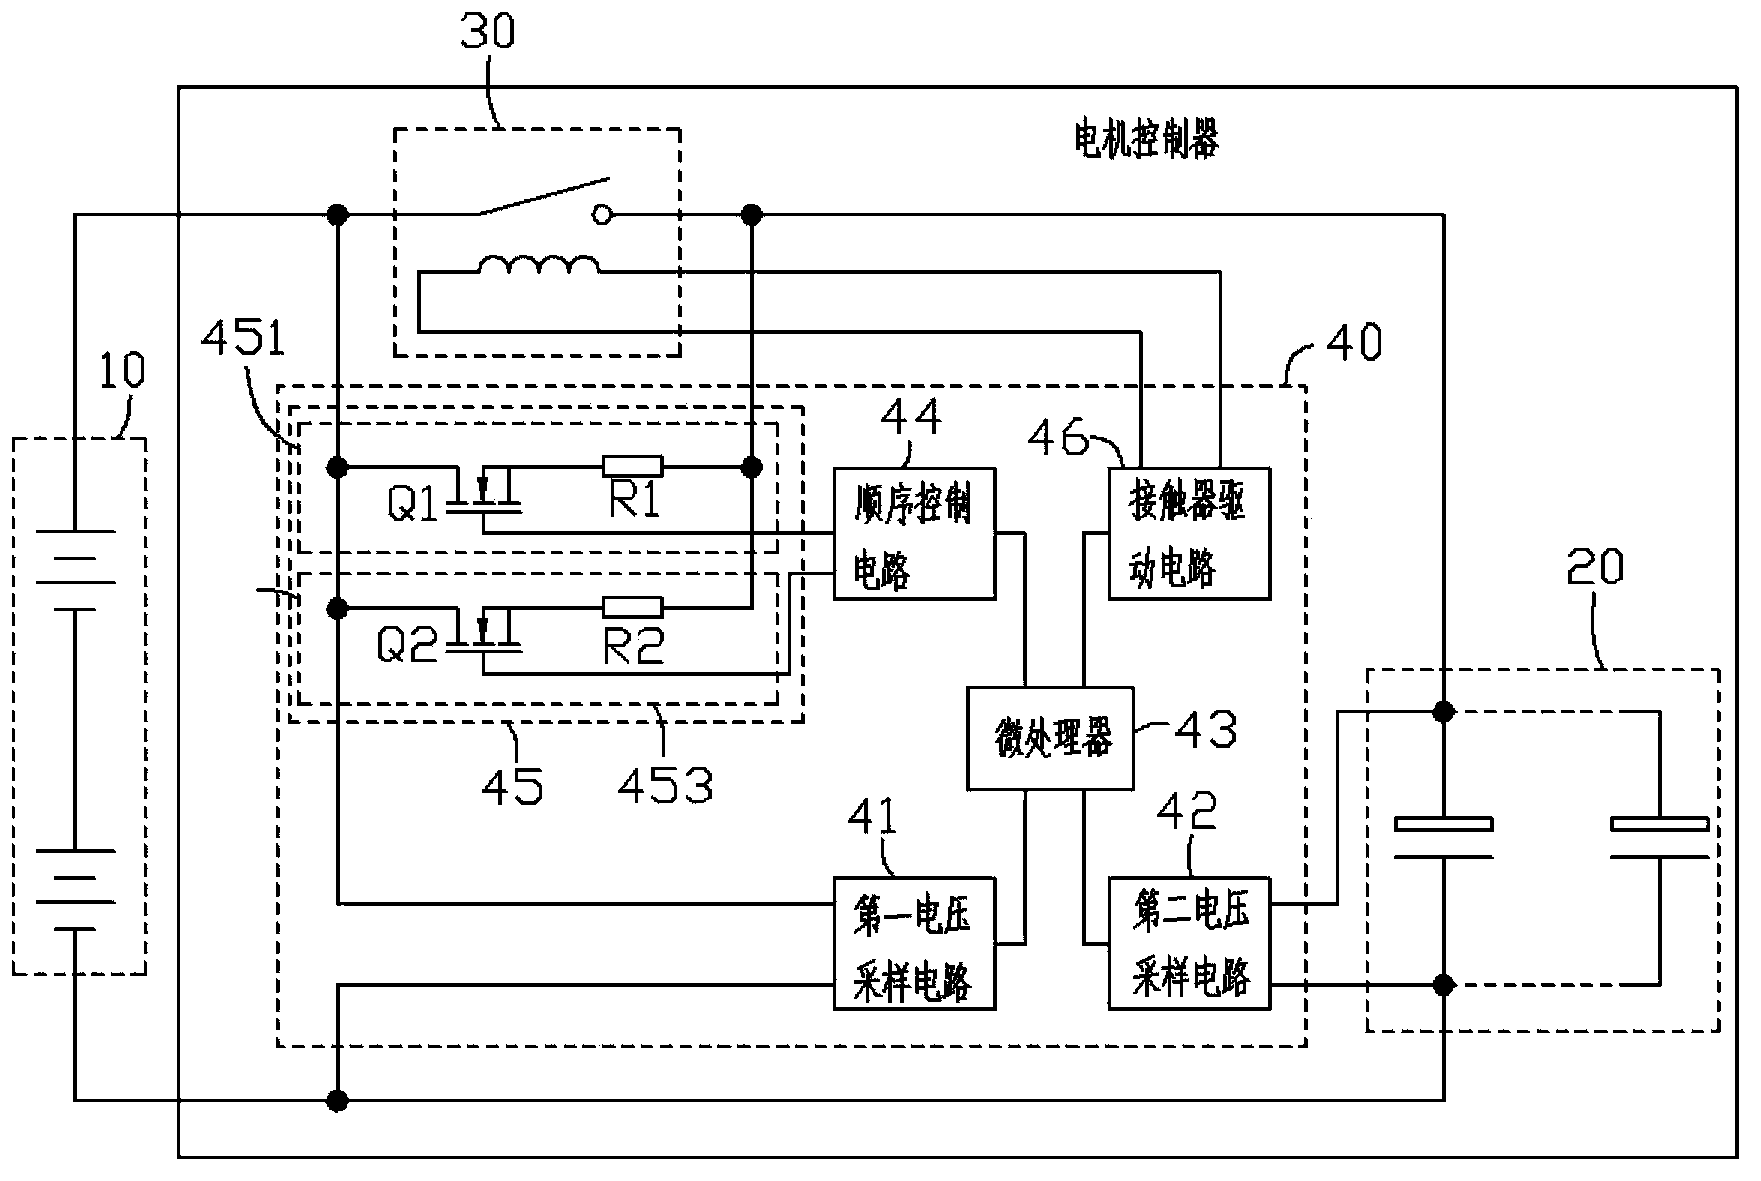 Pre-charging device of motor controller